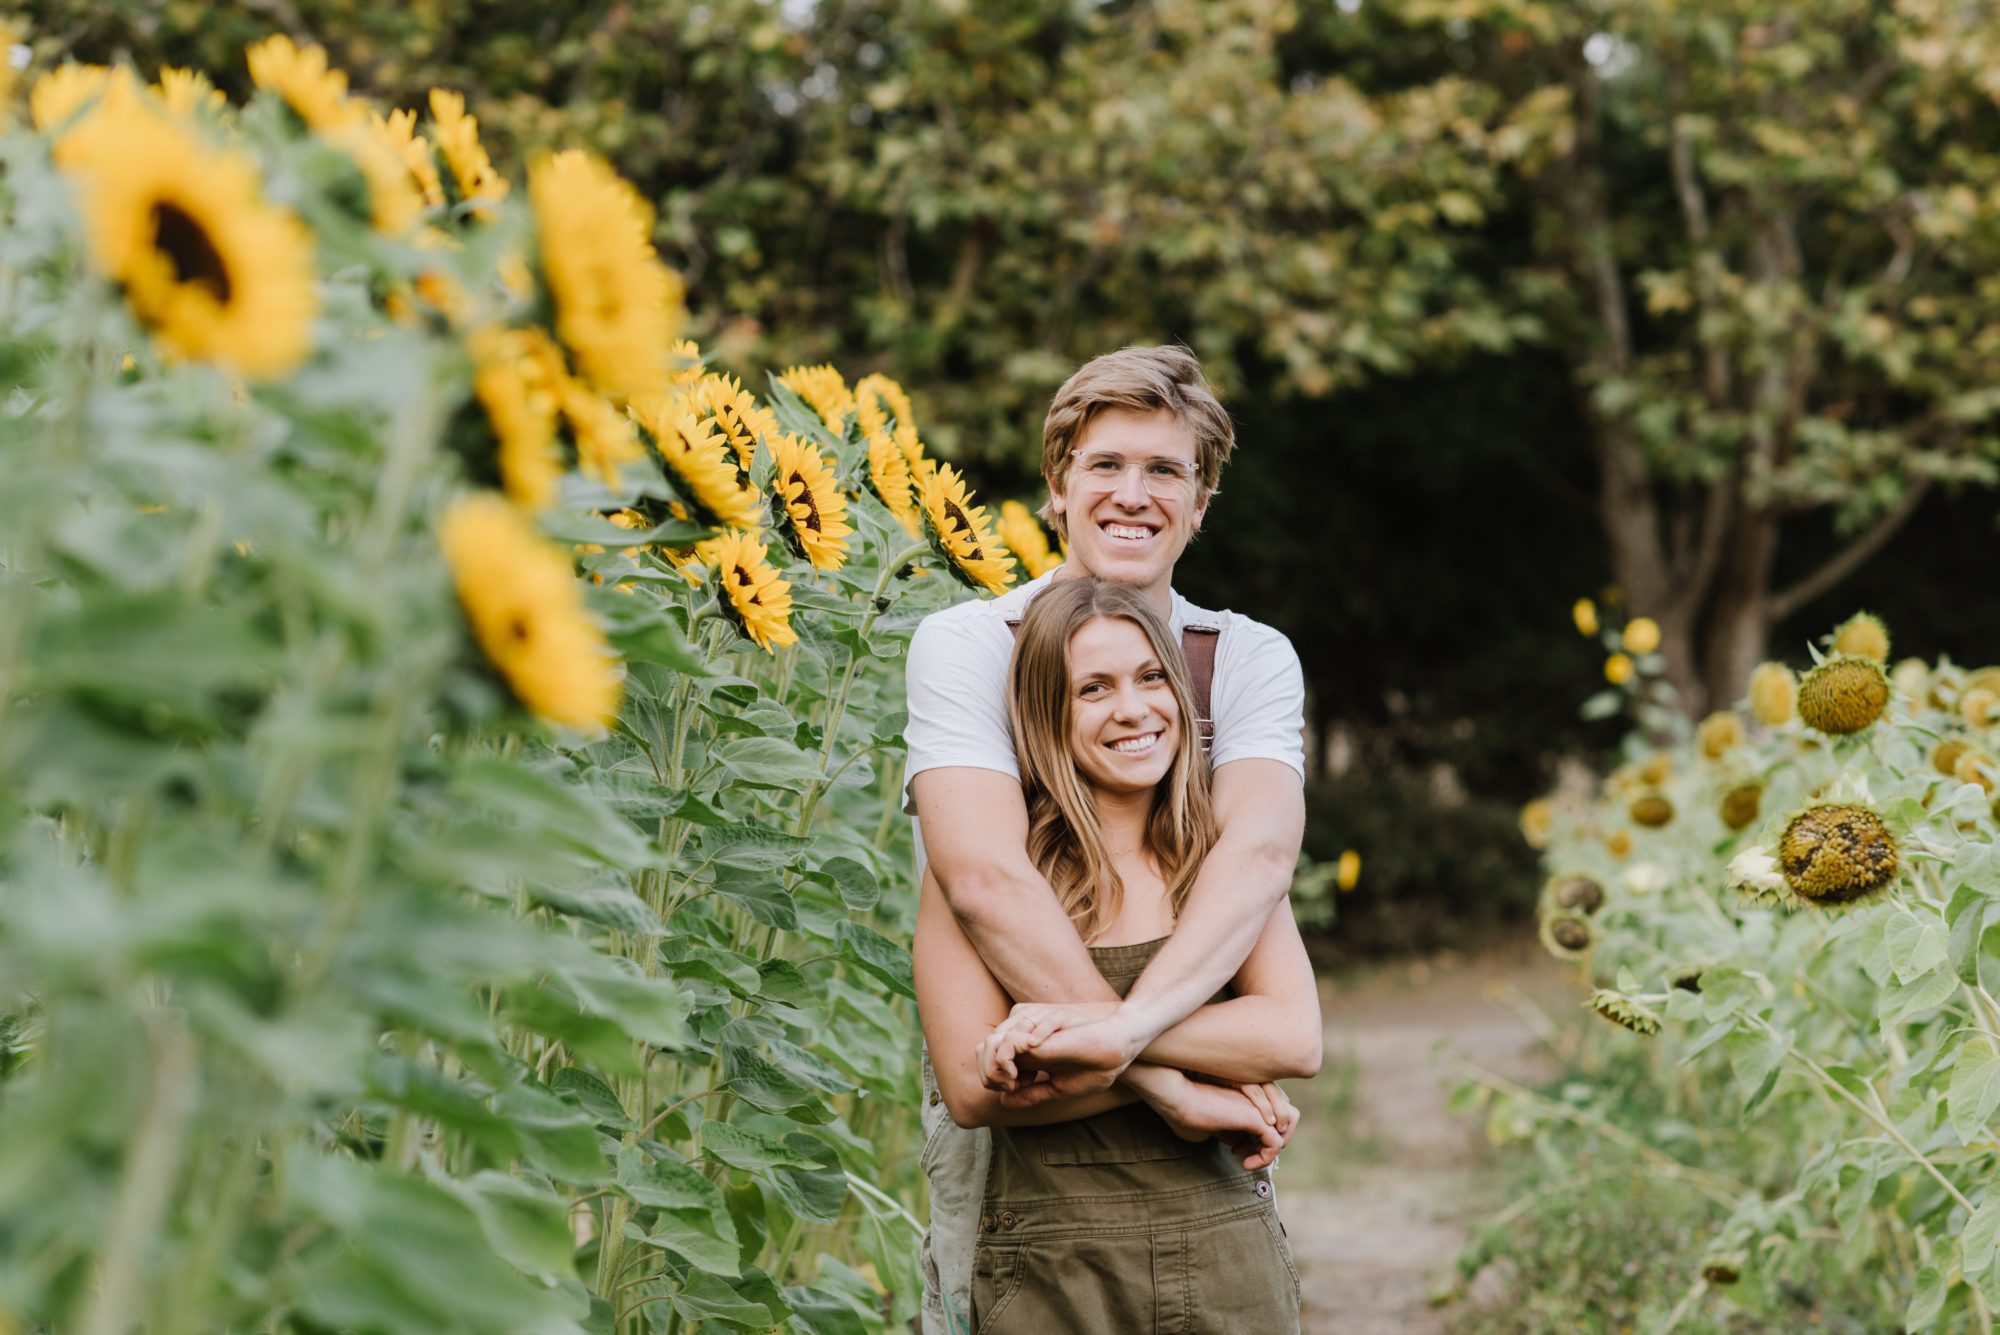 Choosing an Engagement Session Location